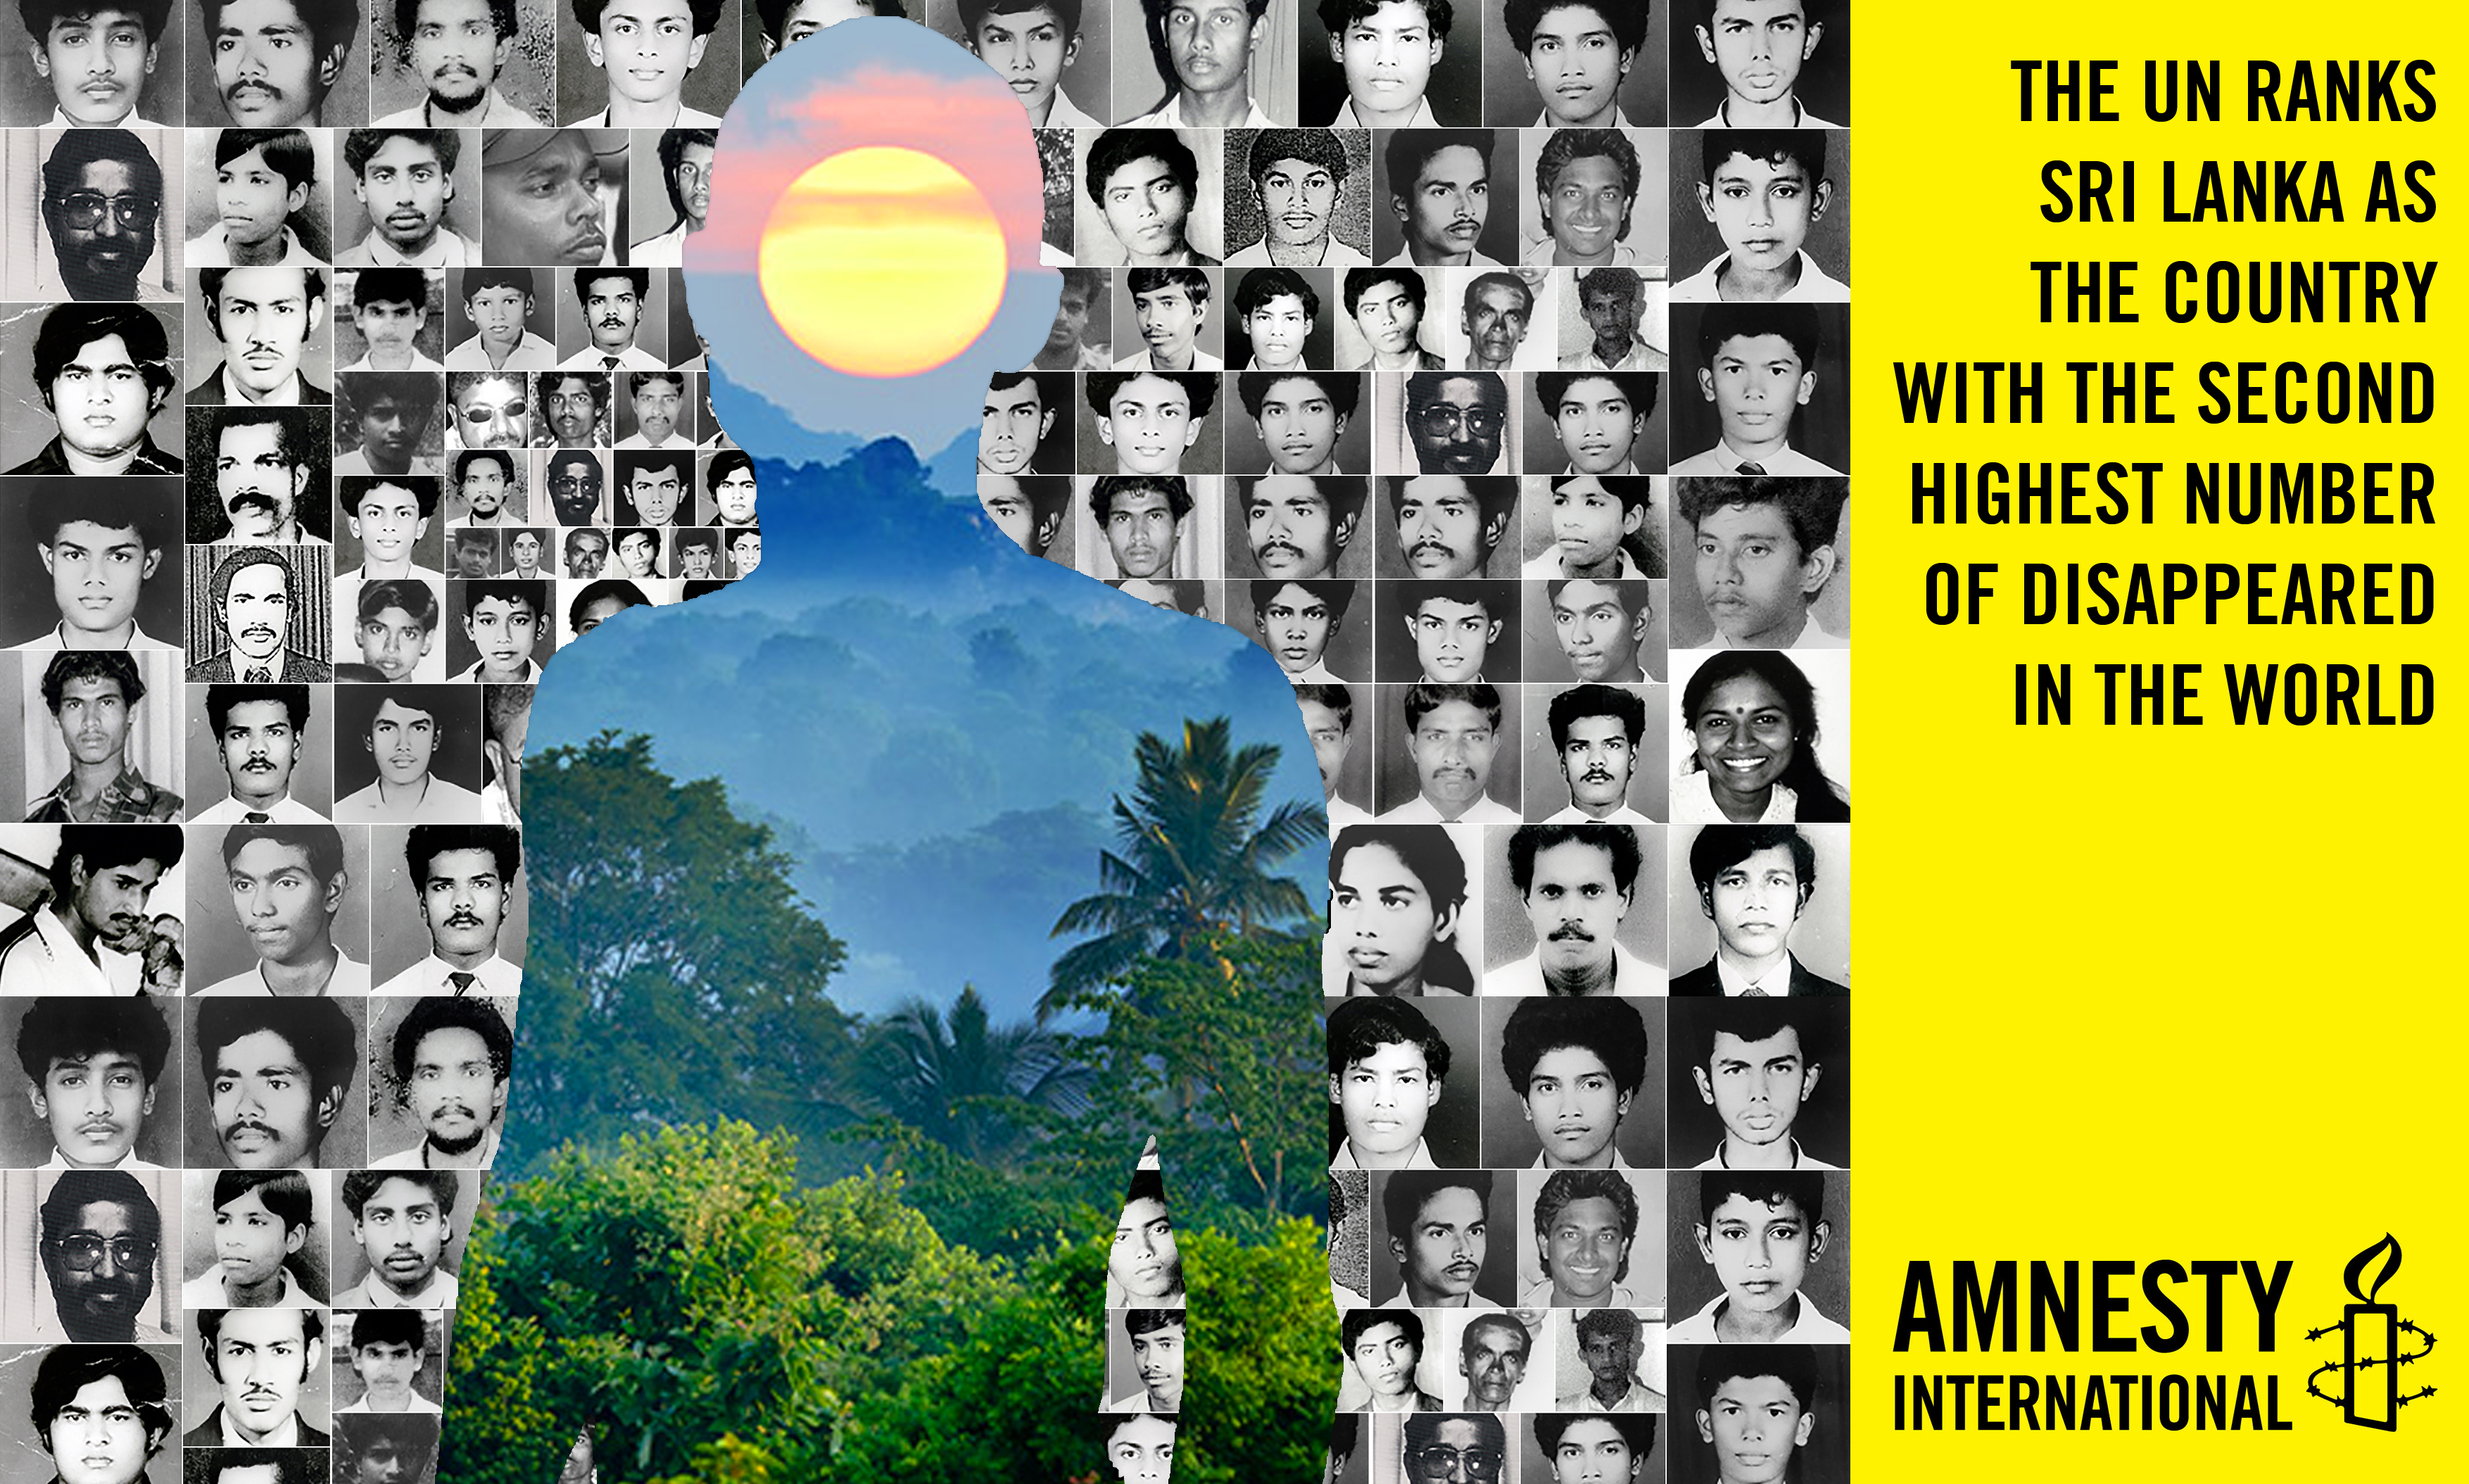 Images produced to highlight disappearances in Sri Lanka over the past 30 years. Produced to coincide with Amnesty International's &quot;Silenced Shadows”, a poetry competition on disappearances in Sri Lanka. Full details: http://join.amnesty.org//ea-campaign/action.retrievestaticpage.do?ea_static_page_id=4326 Text reads: The UN ranks Sri Lanka as the country with the second highest number of disappeared in the world.